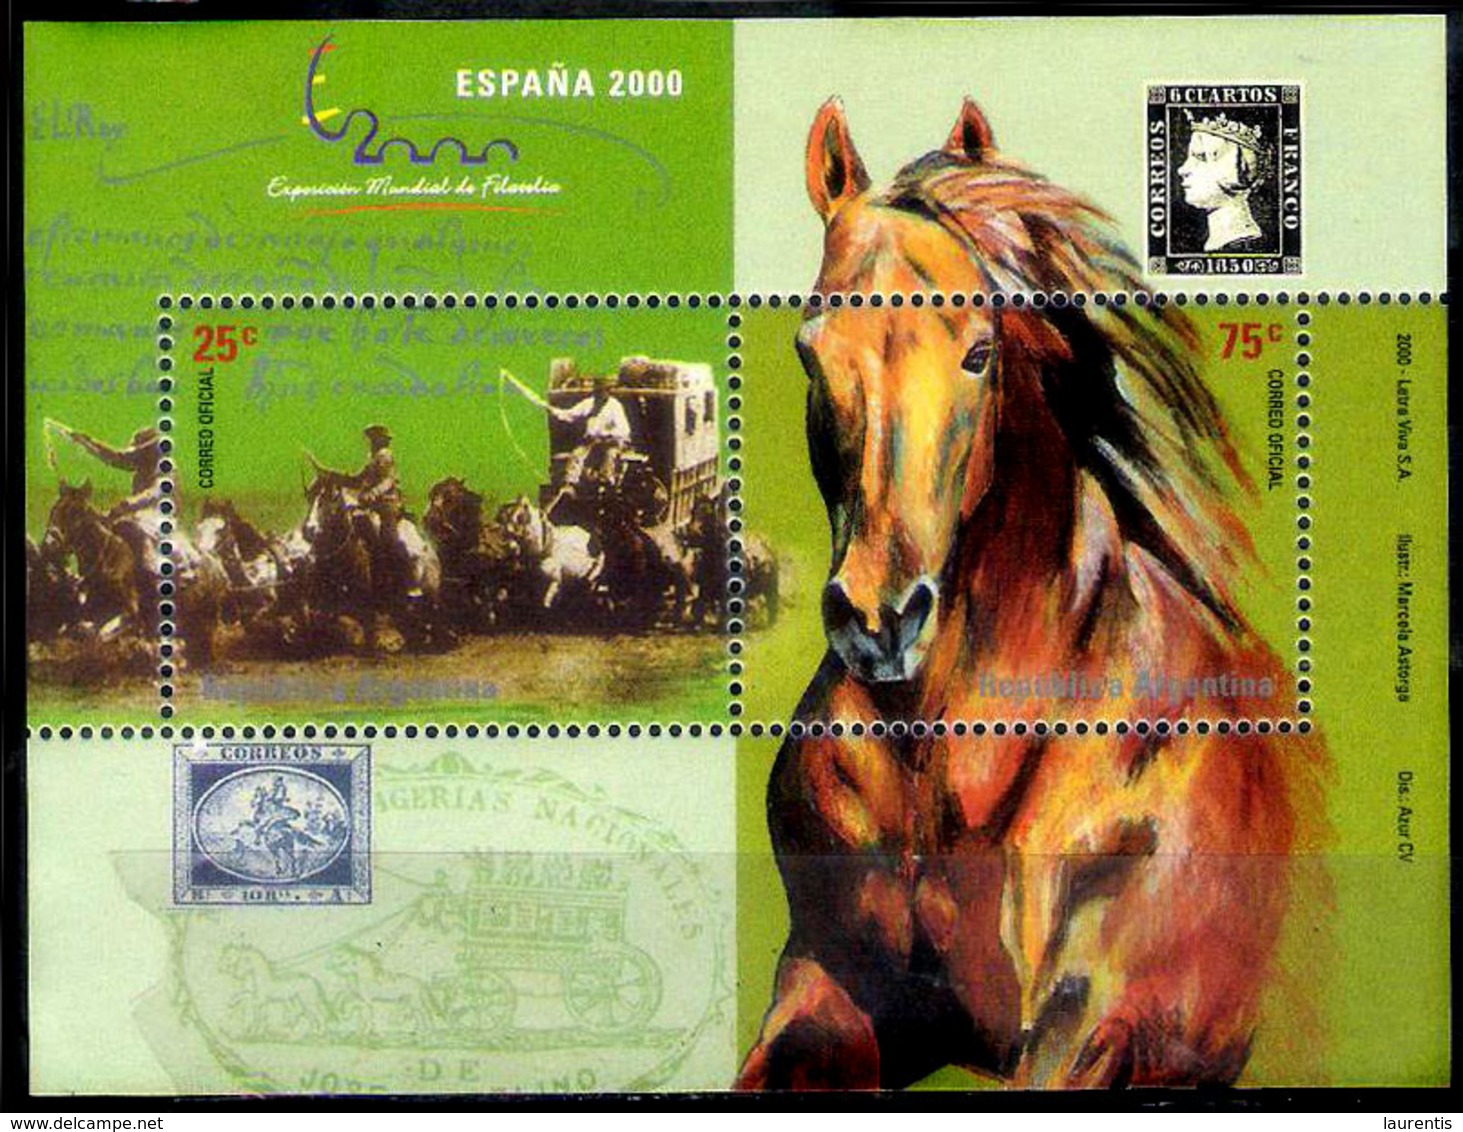 233  Horses - Coaches - Stamp On Stamp - Argentina Yv B74 - No Gum - Free Shipping - 1,50 (5) - Horses